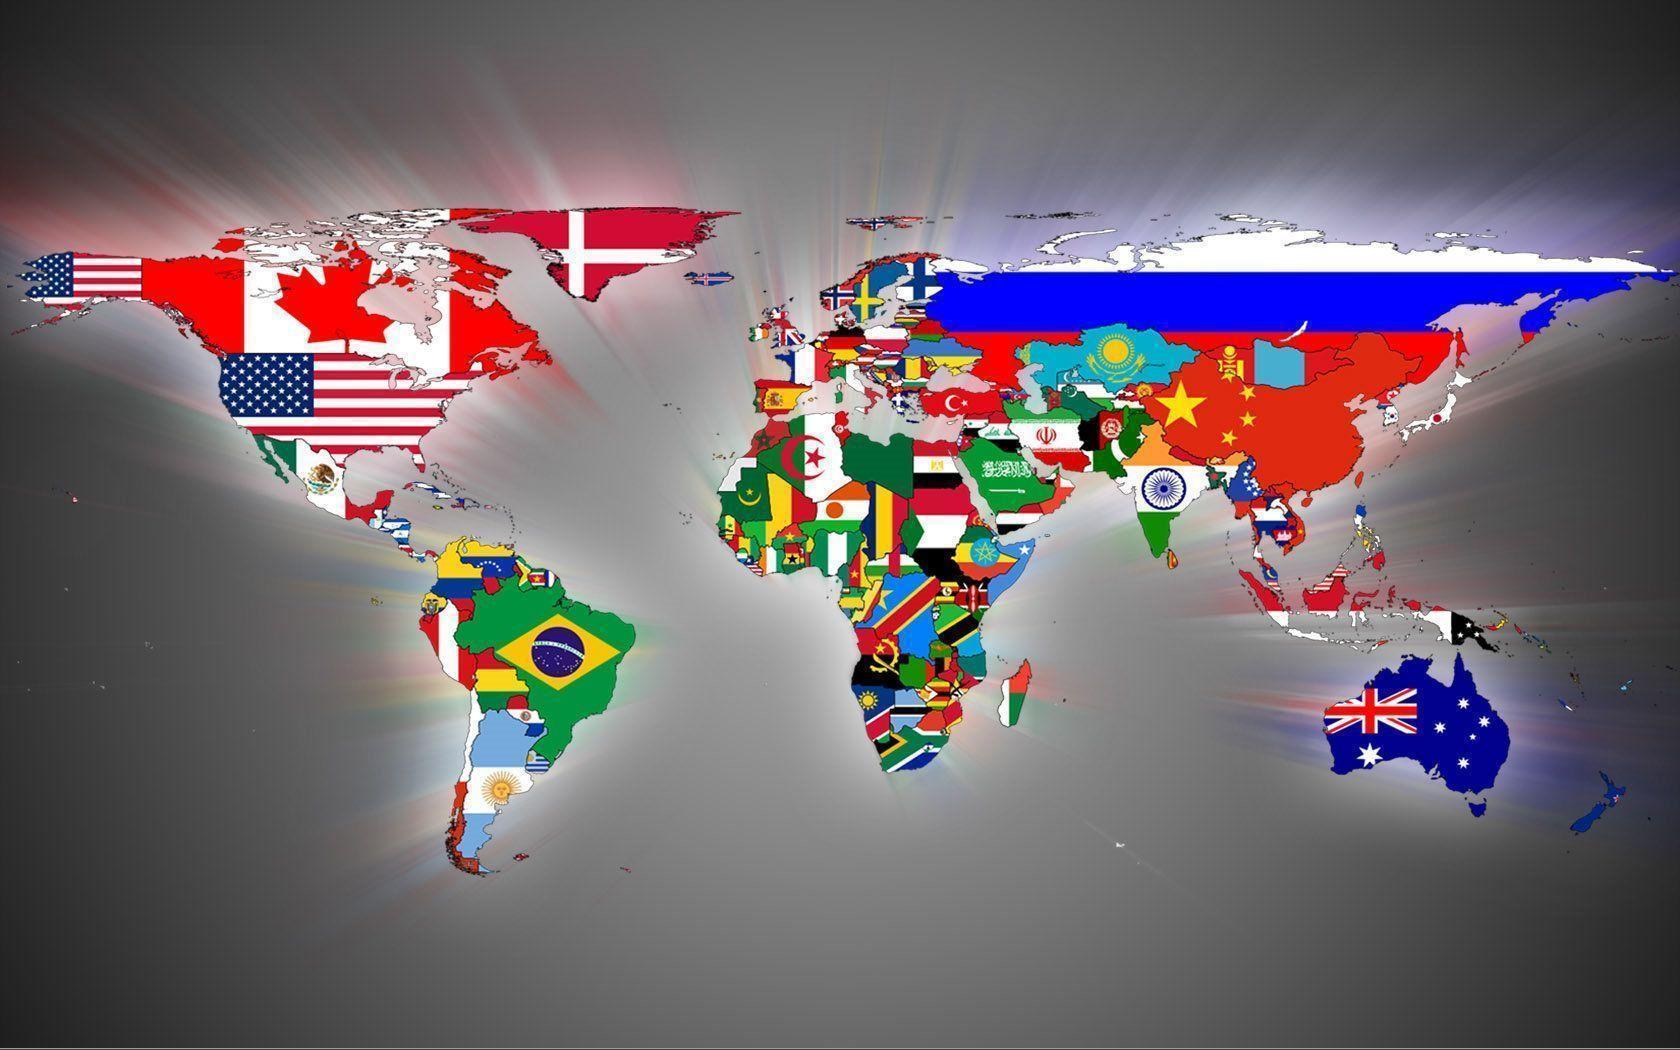 World Map Backgrounds for Powerpoint Presentations, World Map PPT